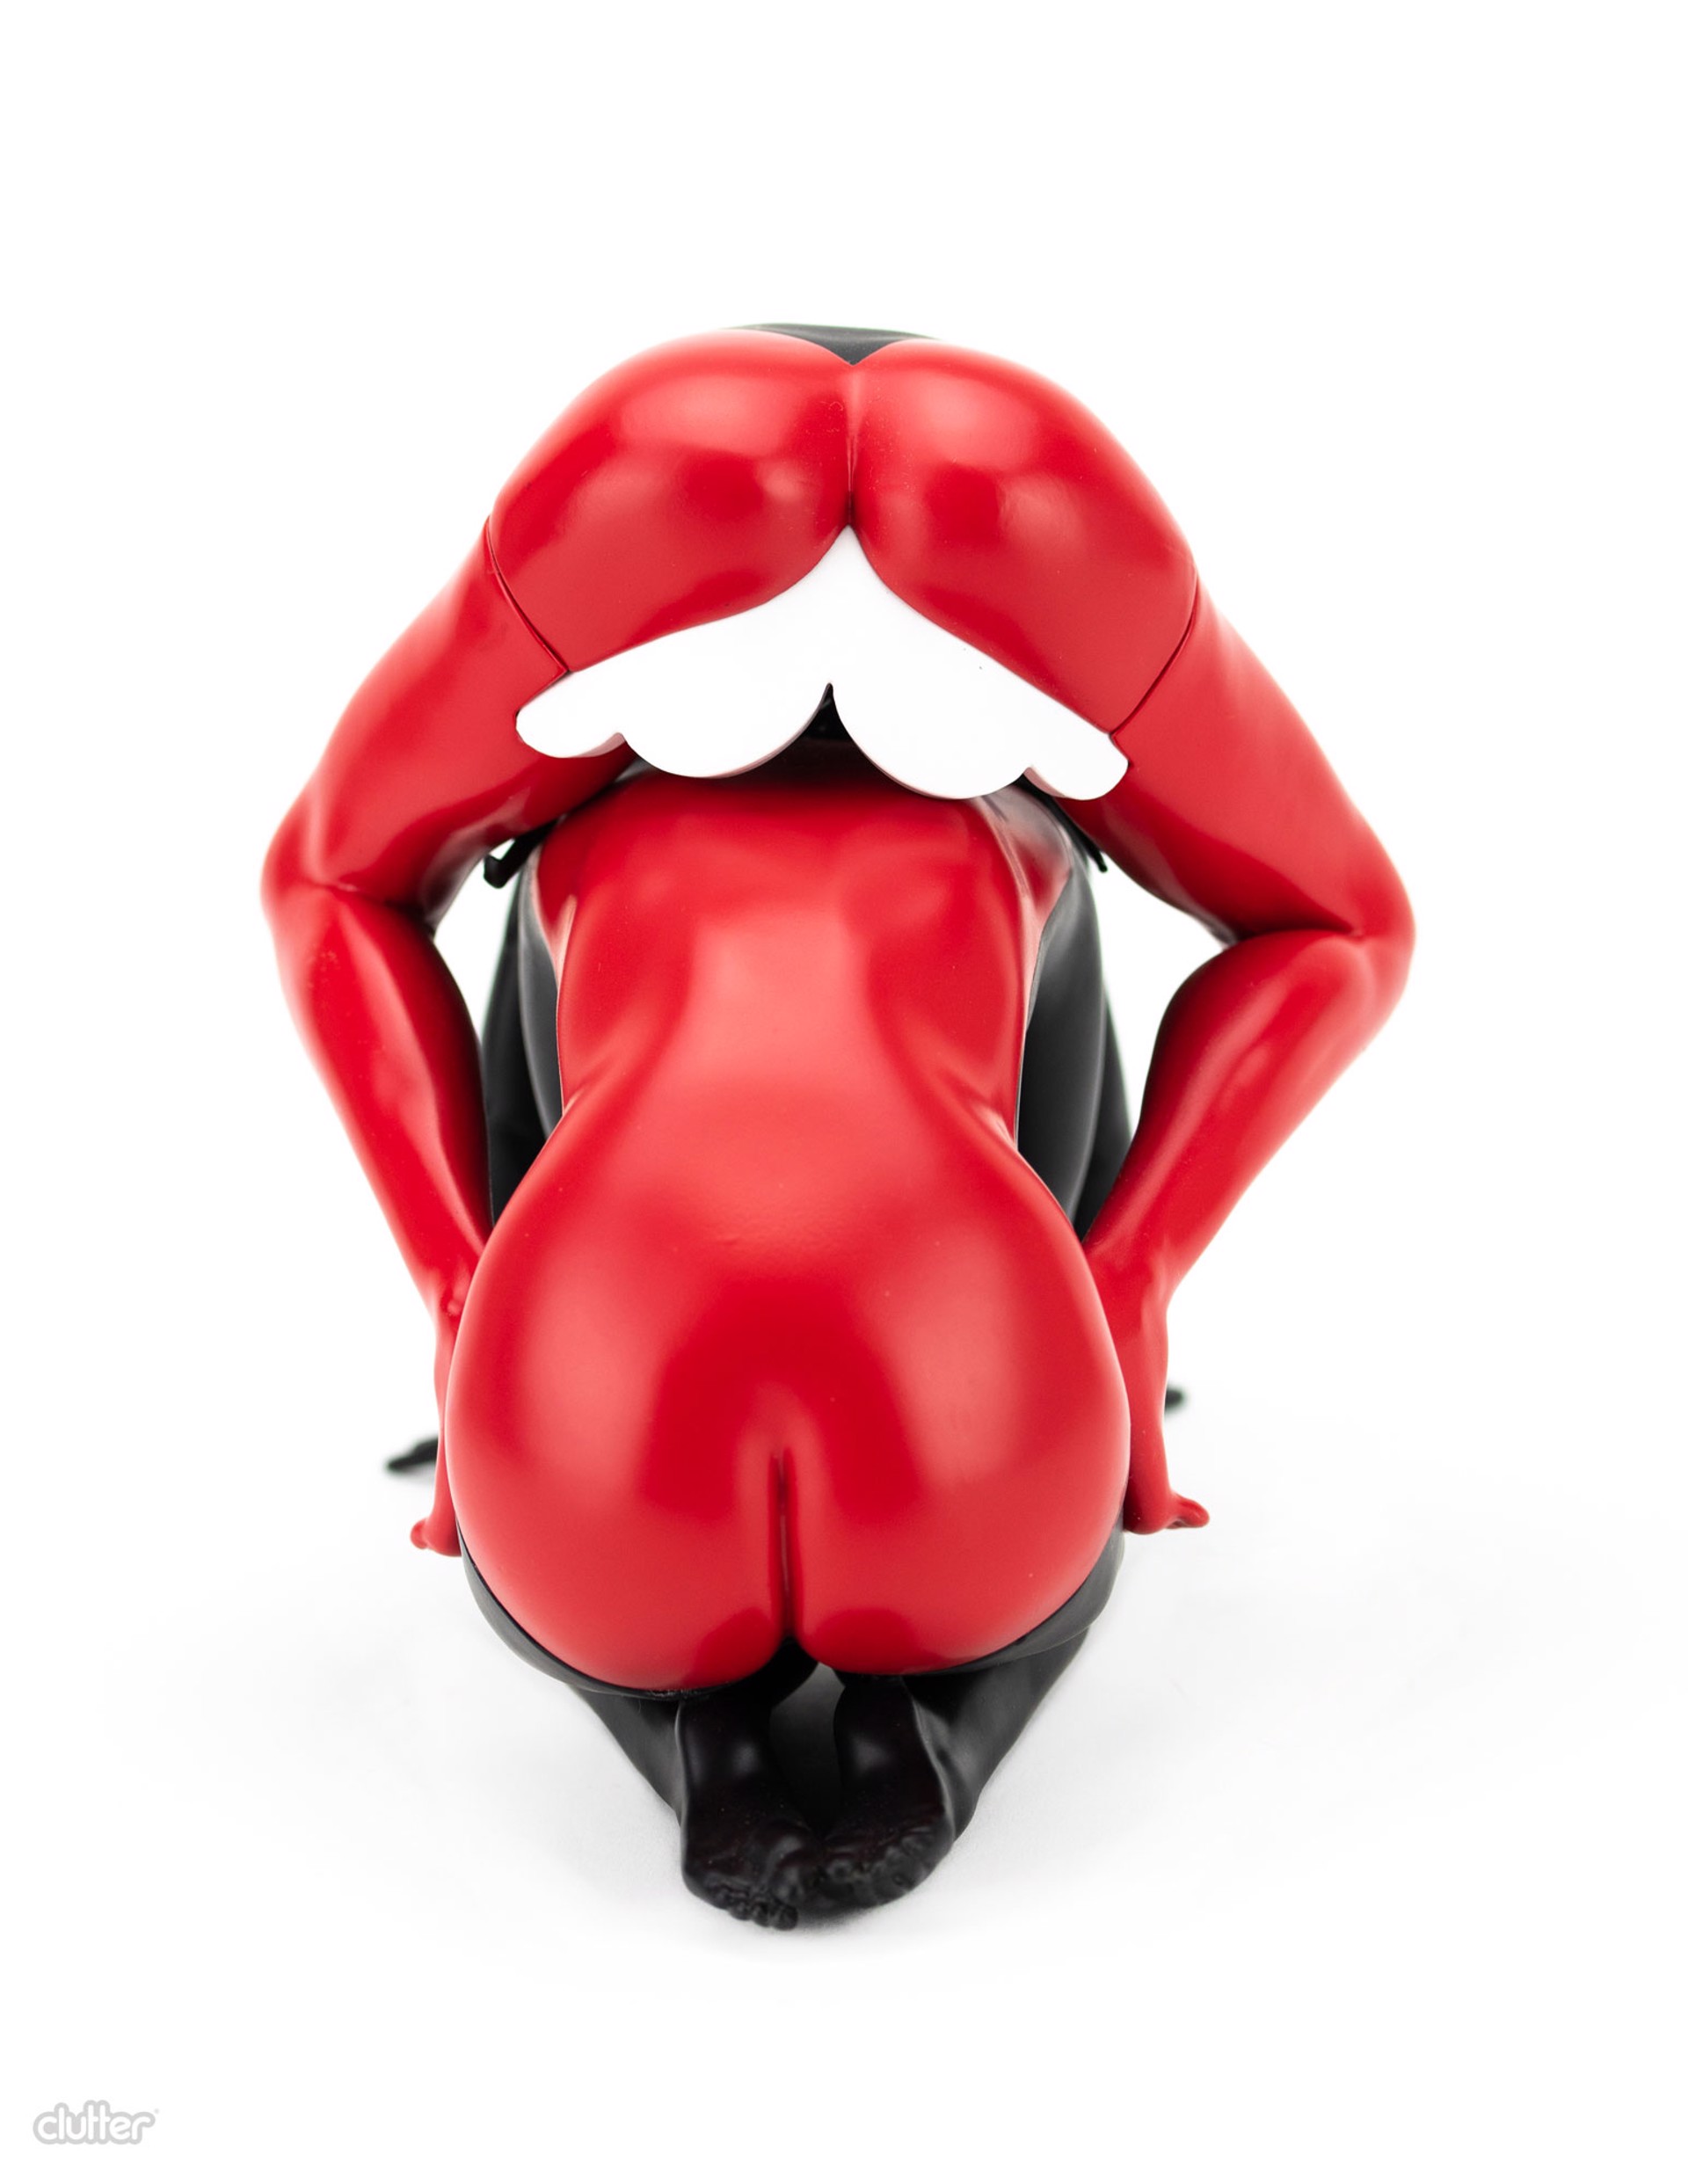 Ron English x Clutter – Lady Lips OG Colorway Vinyl Sculpture by Ron English